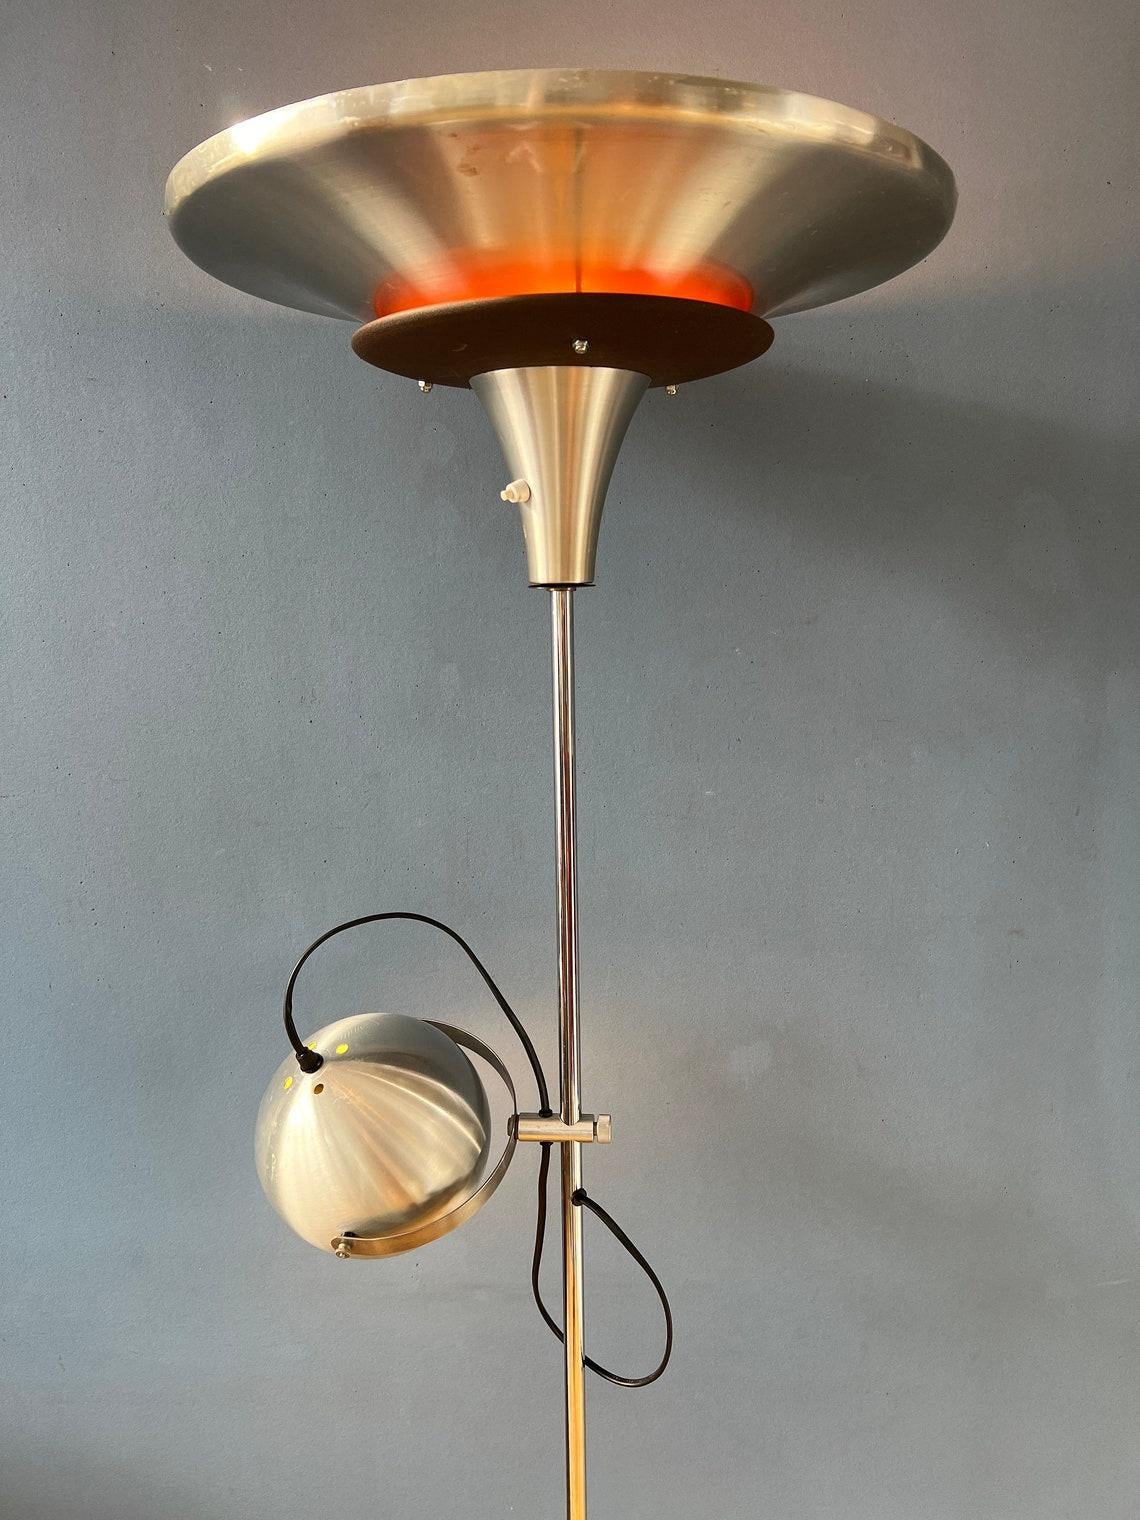 Vintage Lakro Amstelveen space age floor lamp with UFO-shaped shade. On the side the lamp has a small eyeball light. The lamp is made out of metal and aluminium, combining colours of silver, orange and white. The lamp requires two E27 lightbulbs and